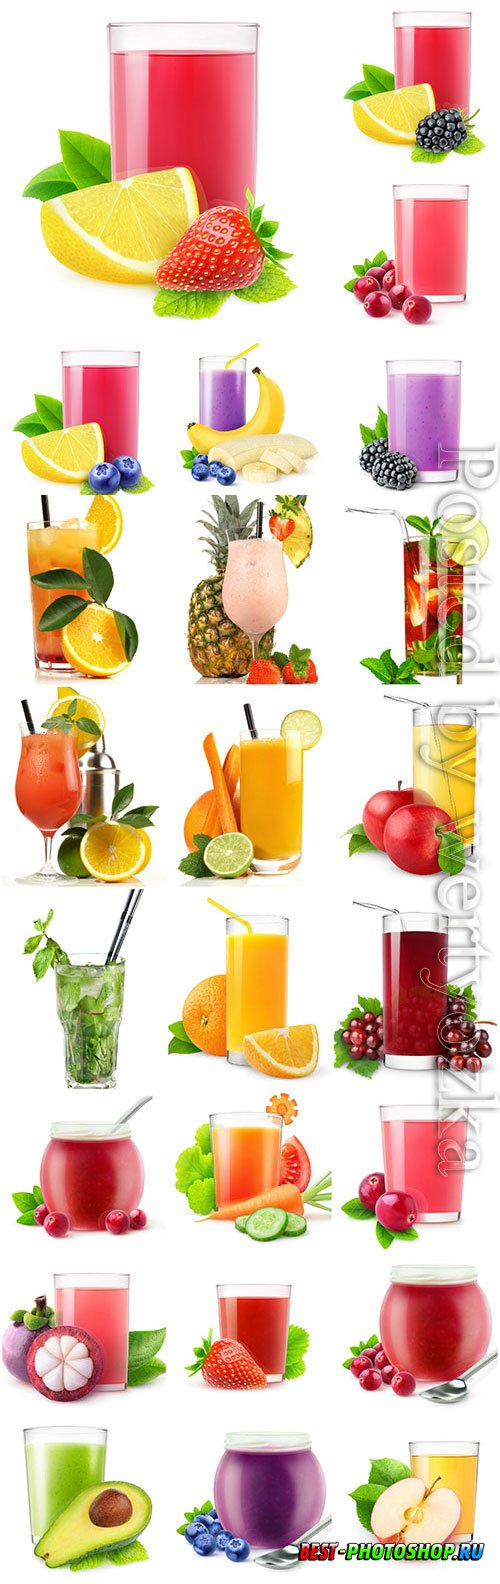 Fresh fruit and berry juices stock photo